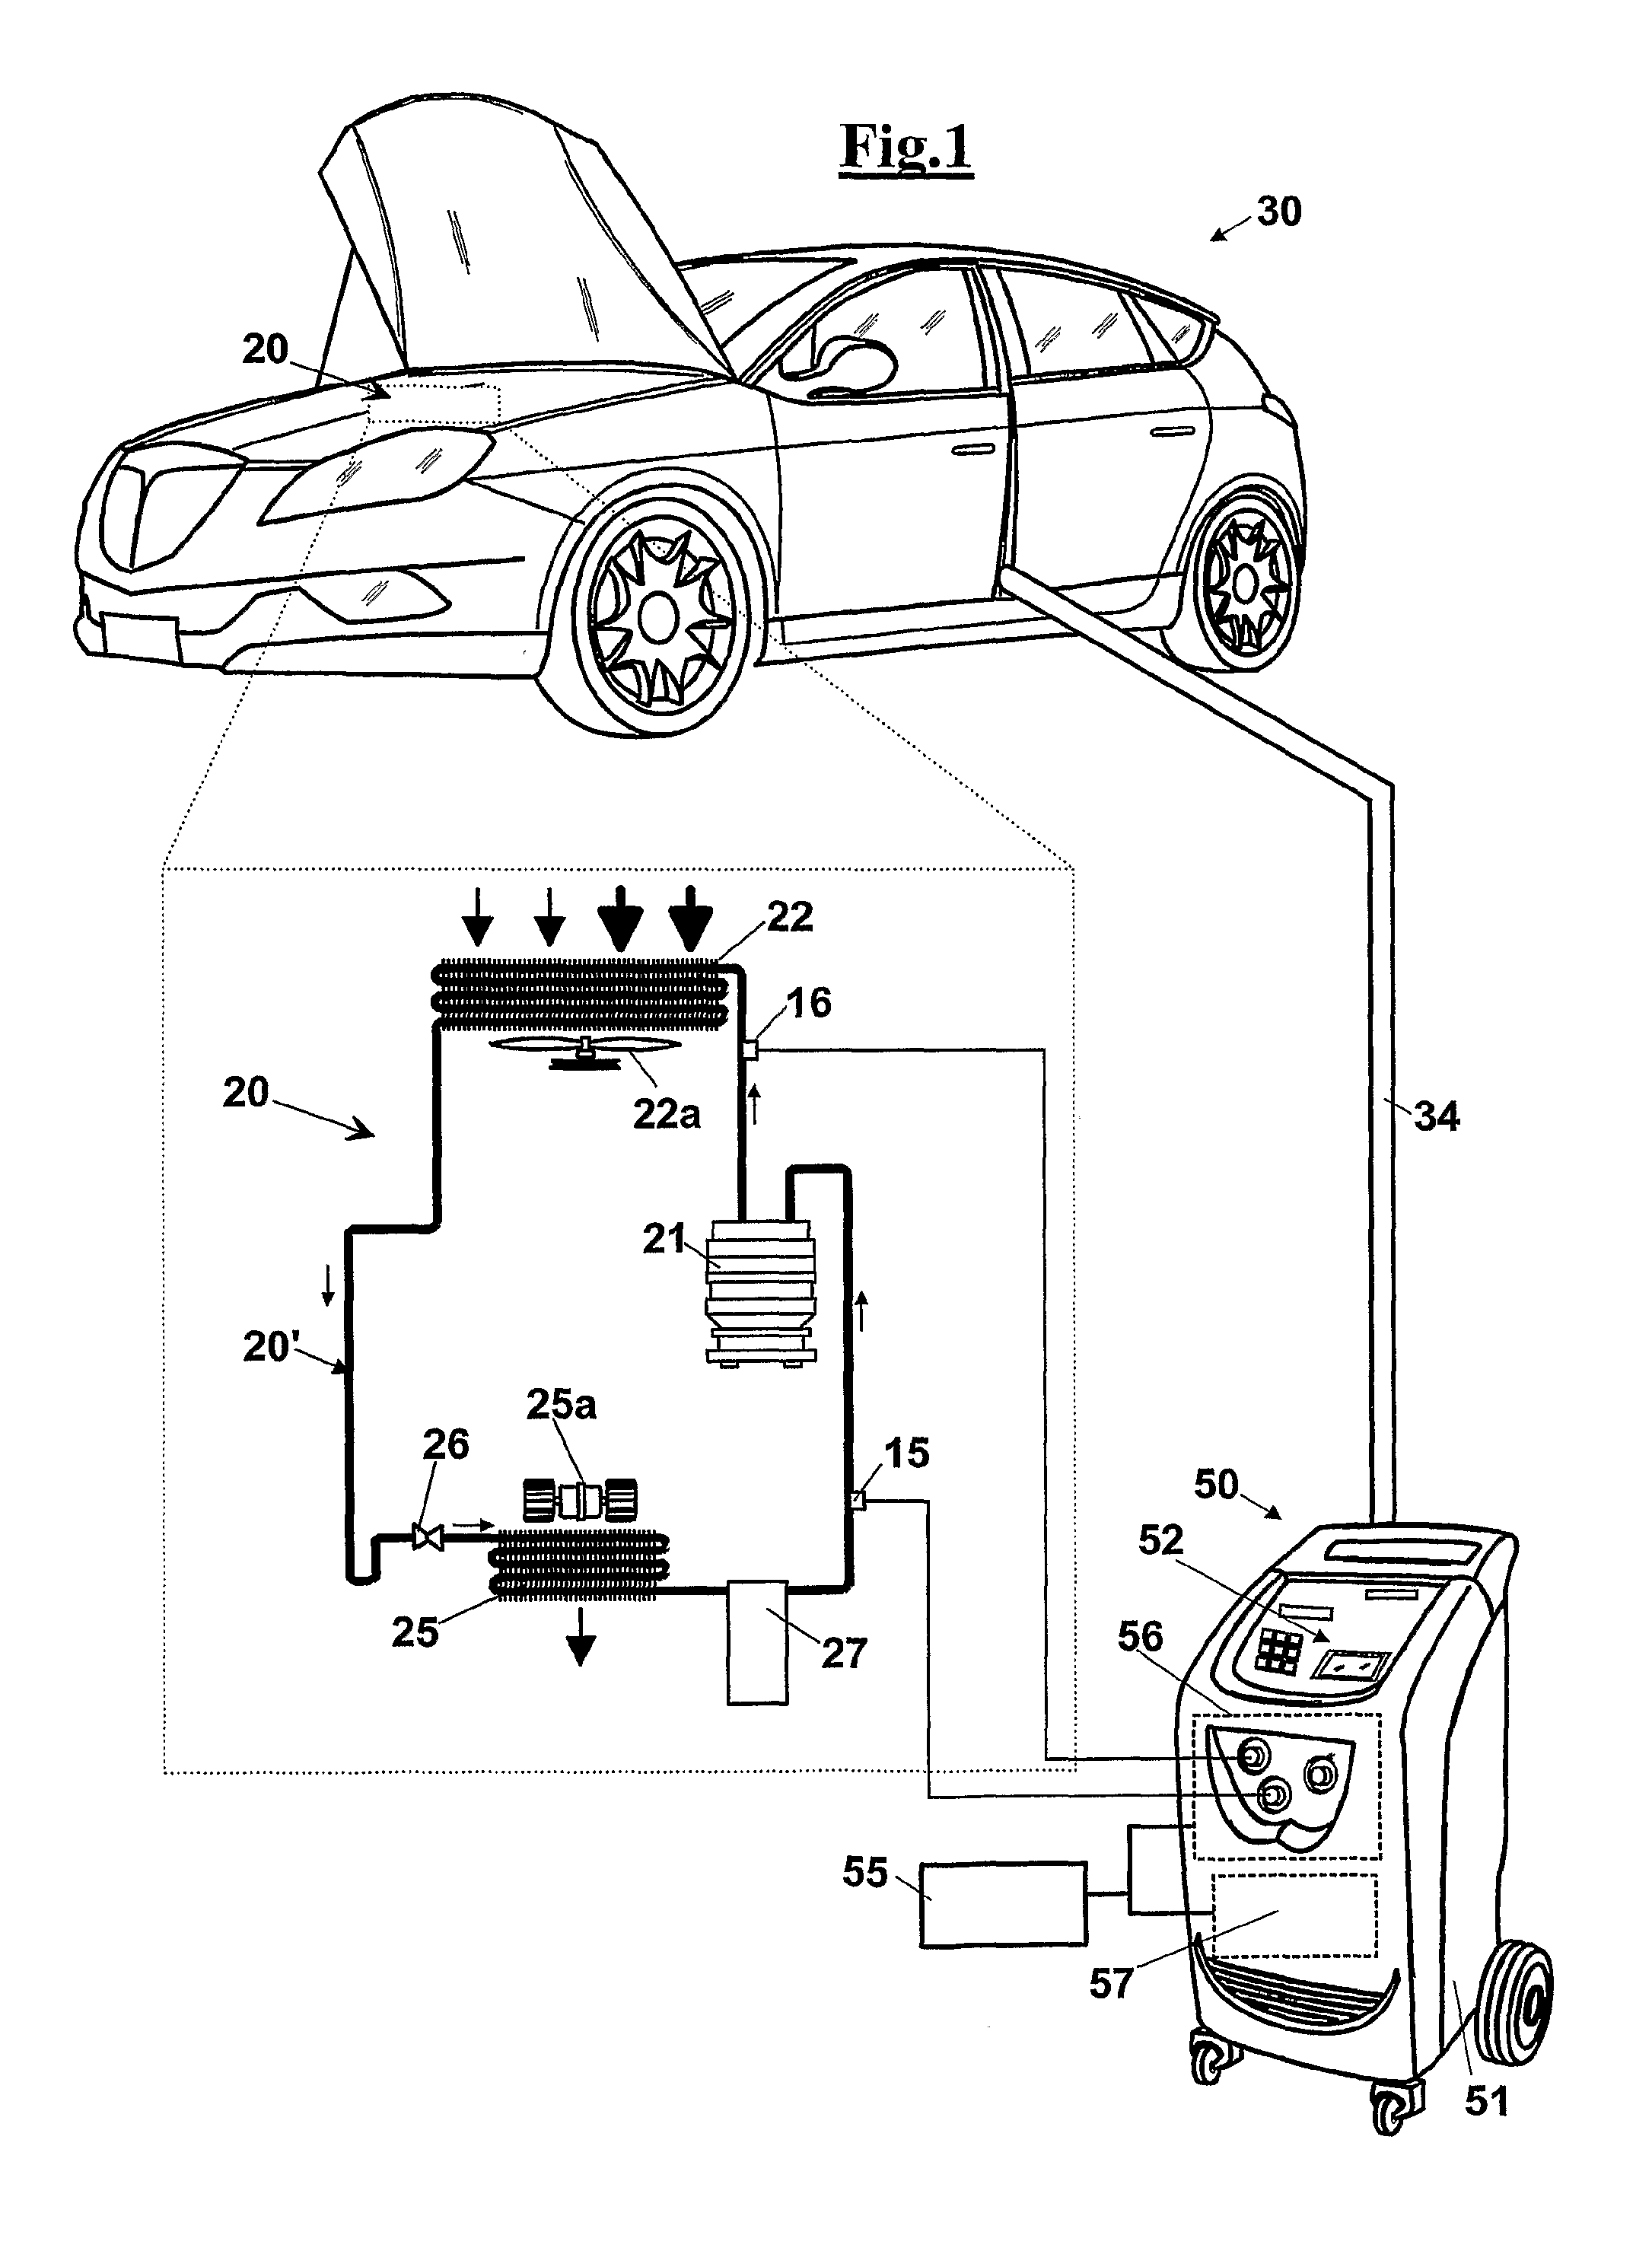 Maintenance apparatus and method for an air conditioning system of a motor vehicle